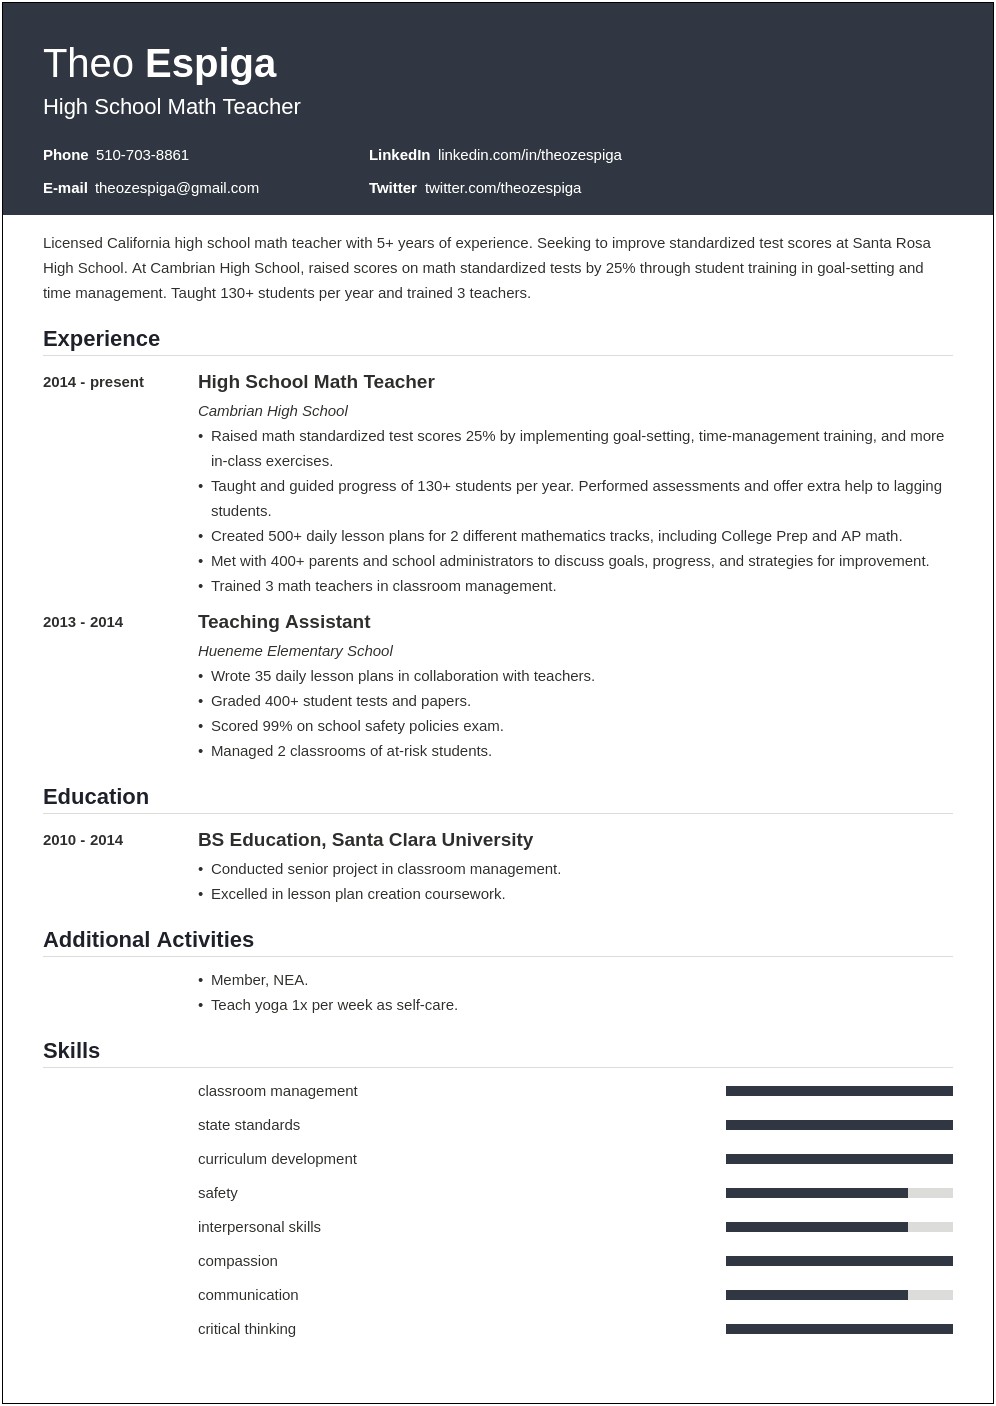 Resume Education Section After 6 Years Of Working